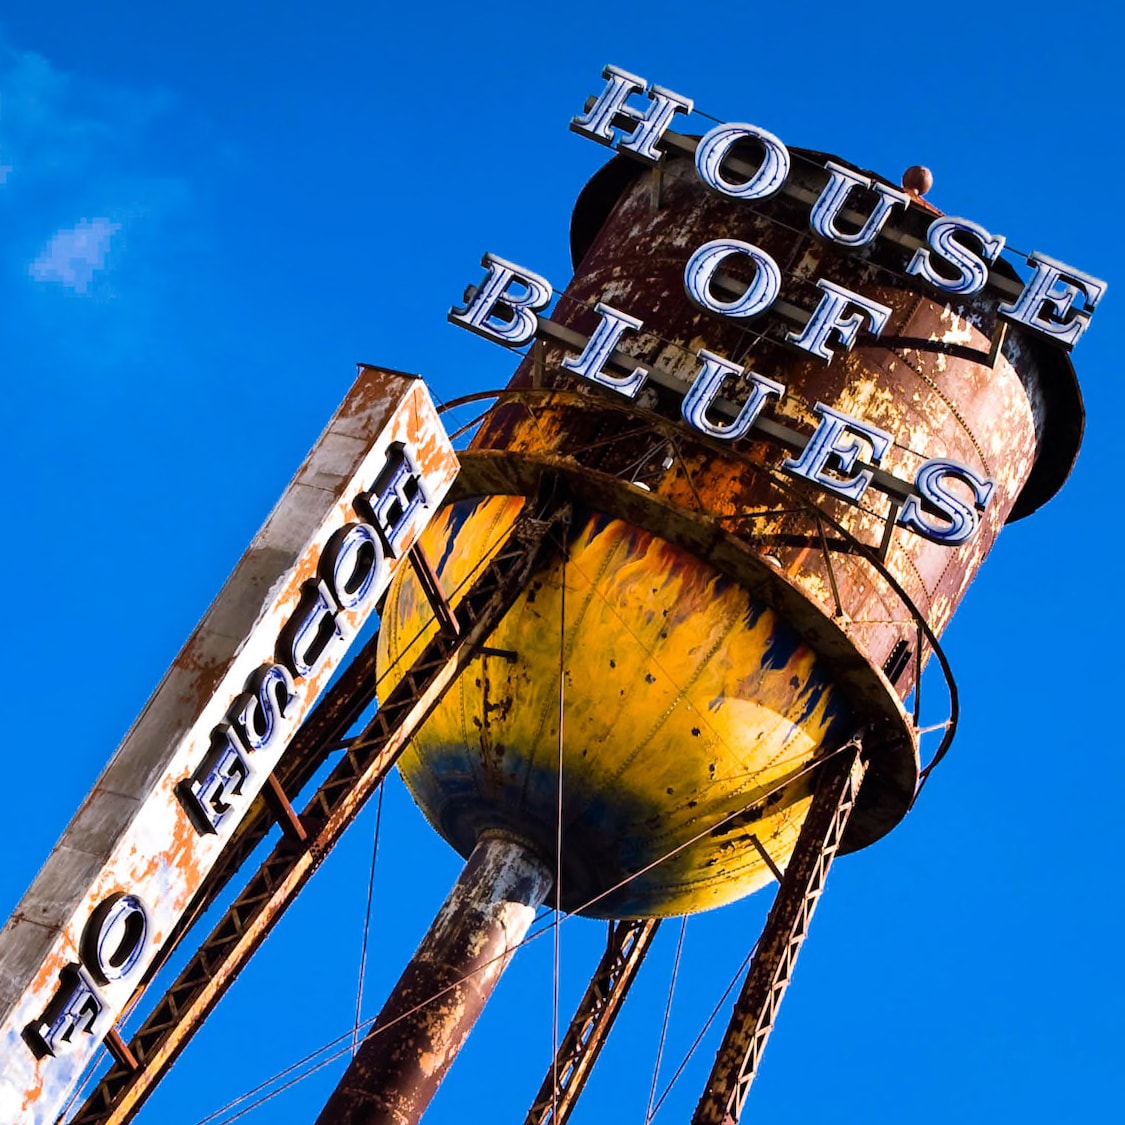 View skyward of the House of Blues sign